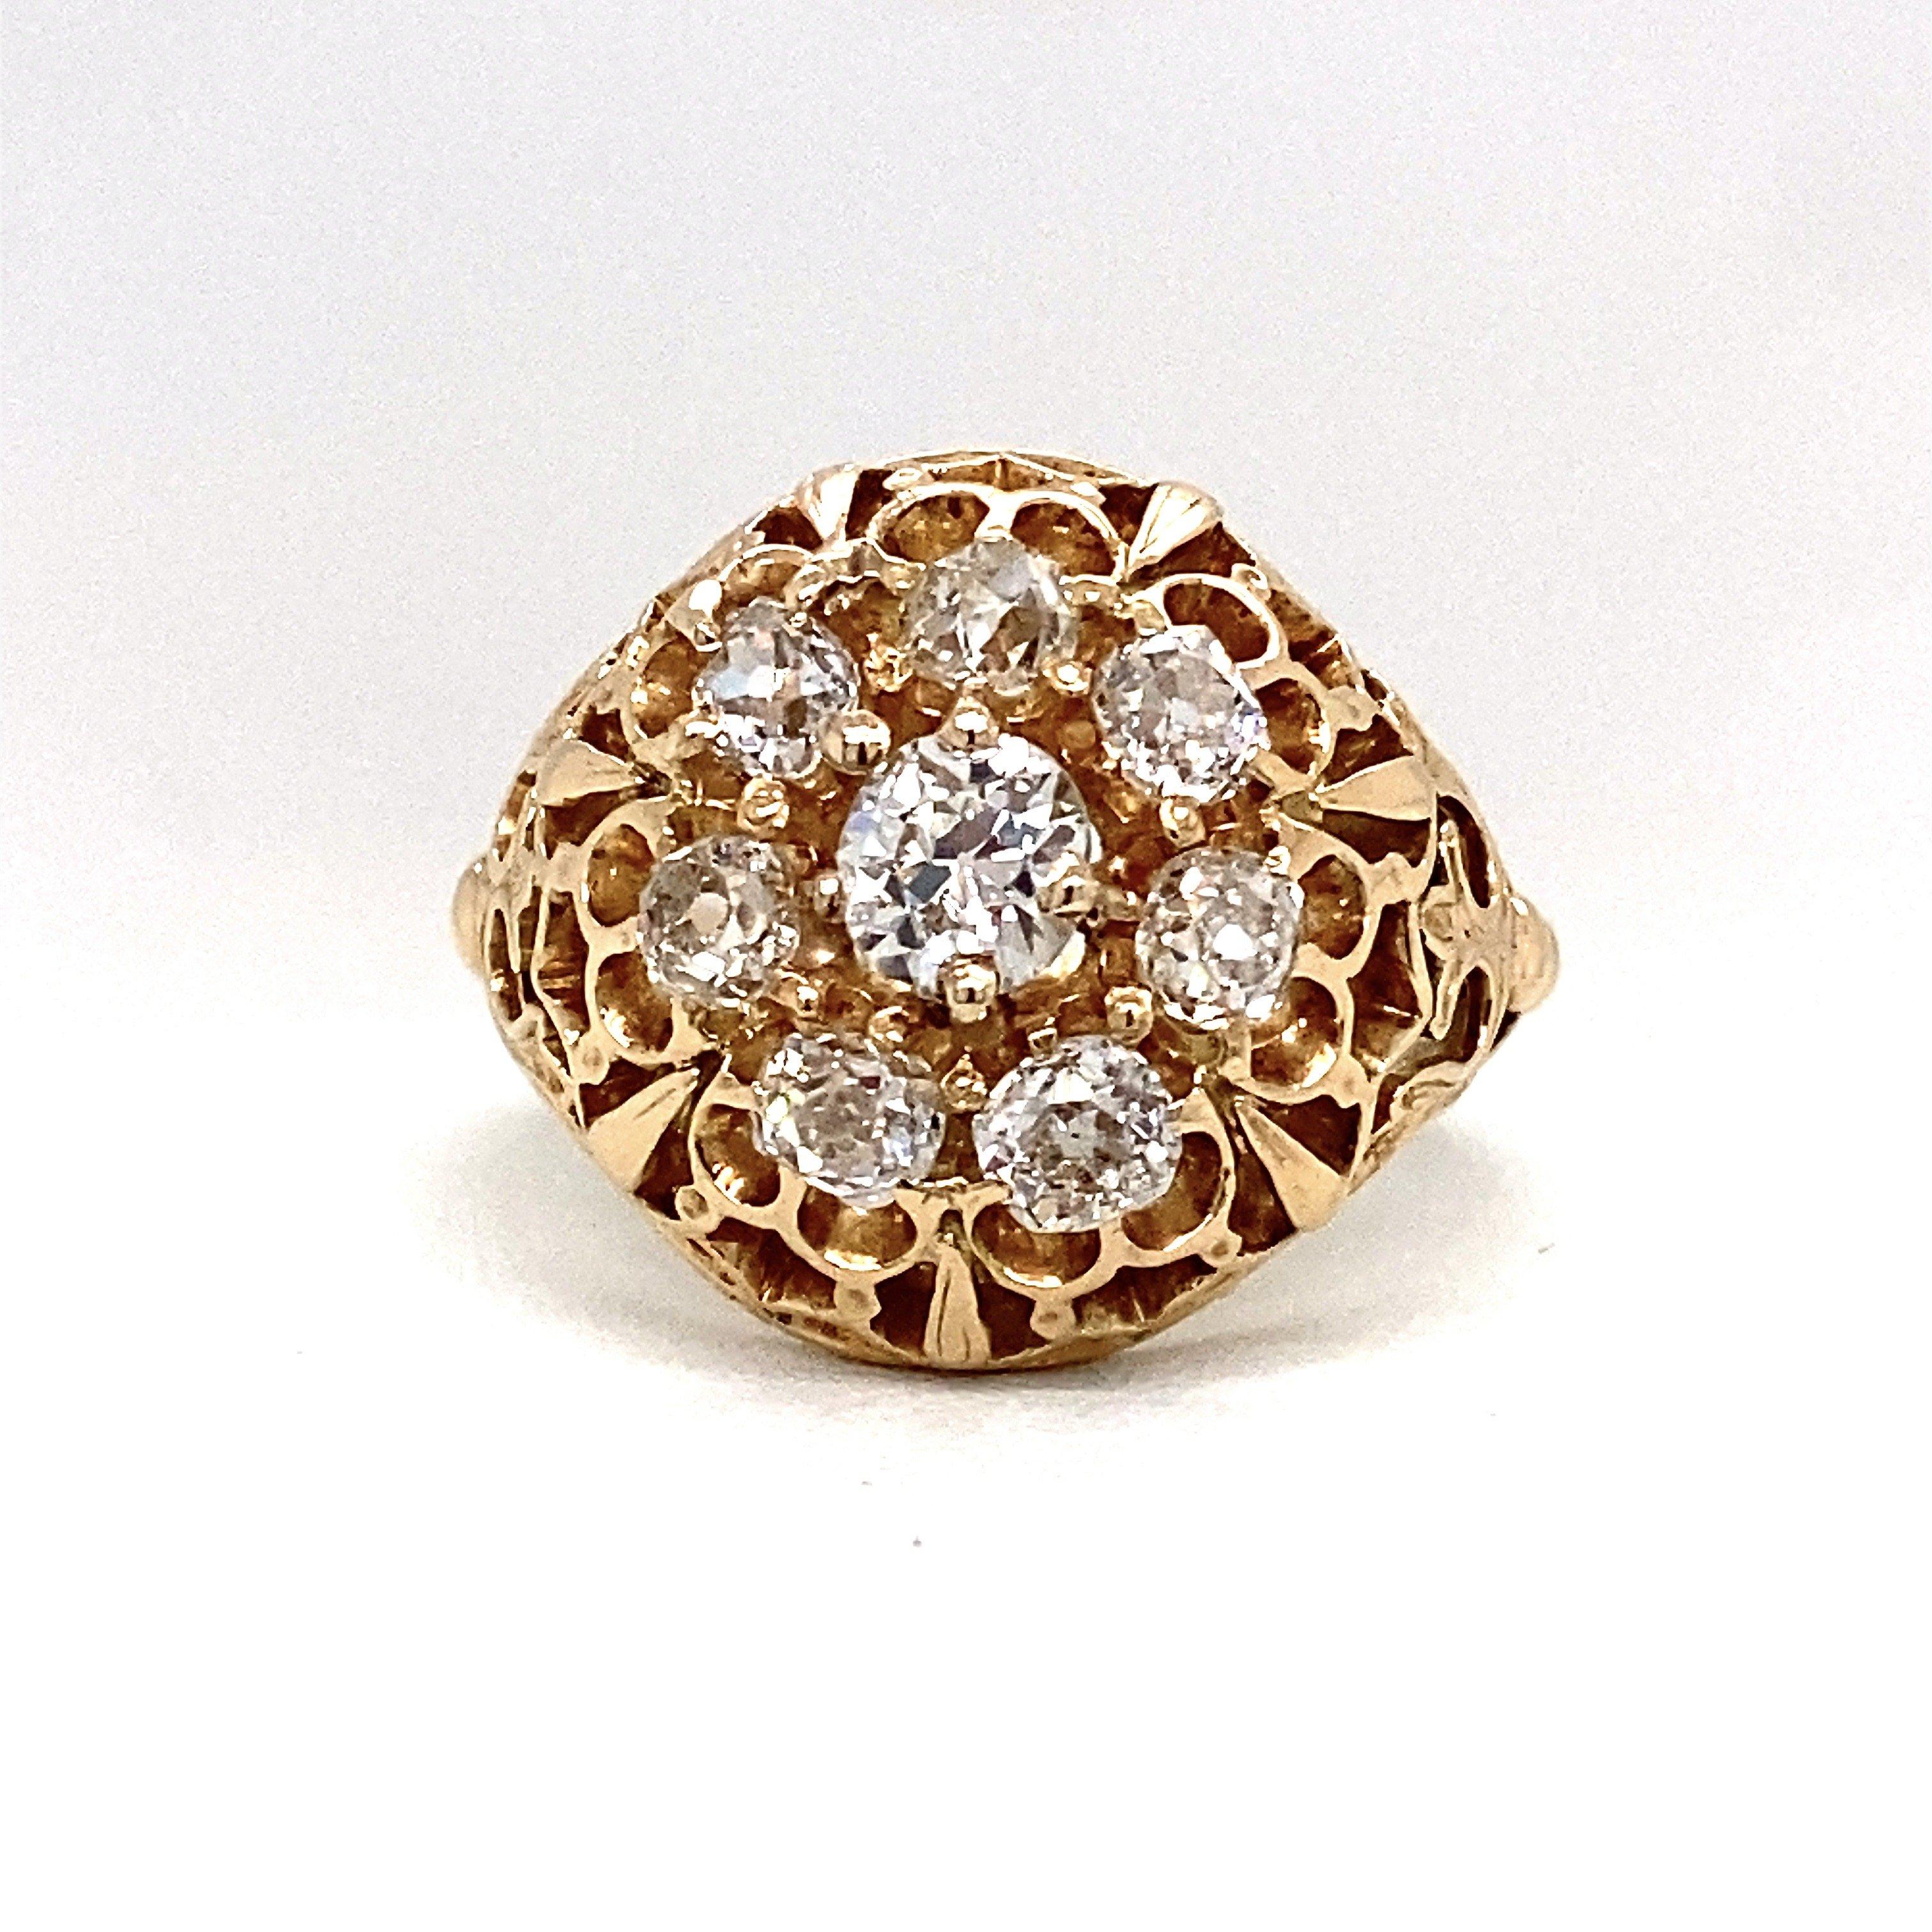 Antique 18KT Gold 1.5CT Diamond Domed Cluster Ring, Engraved 1861 3